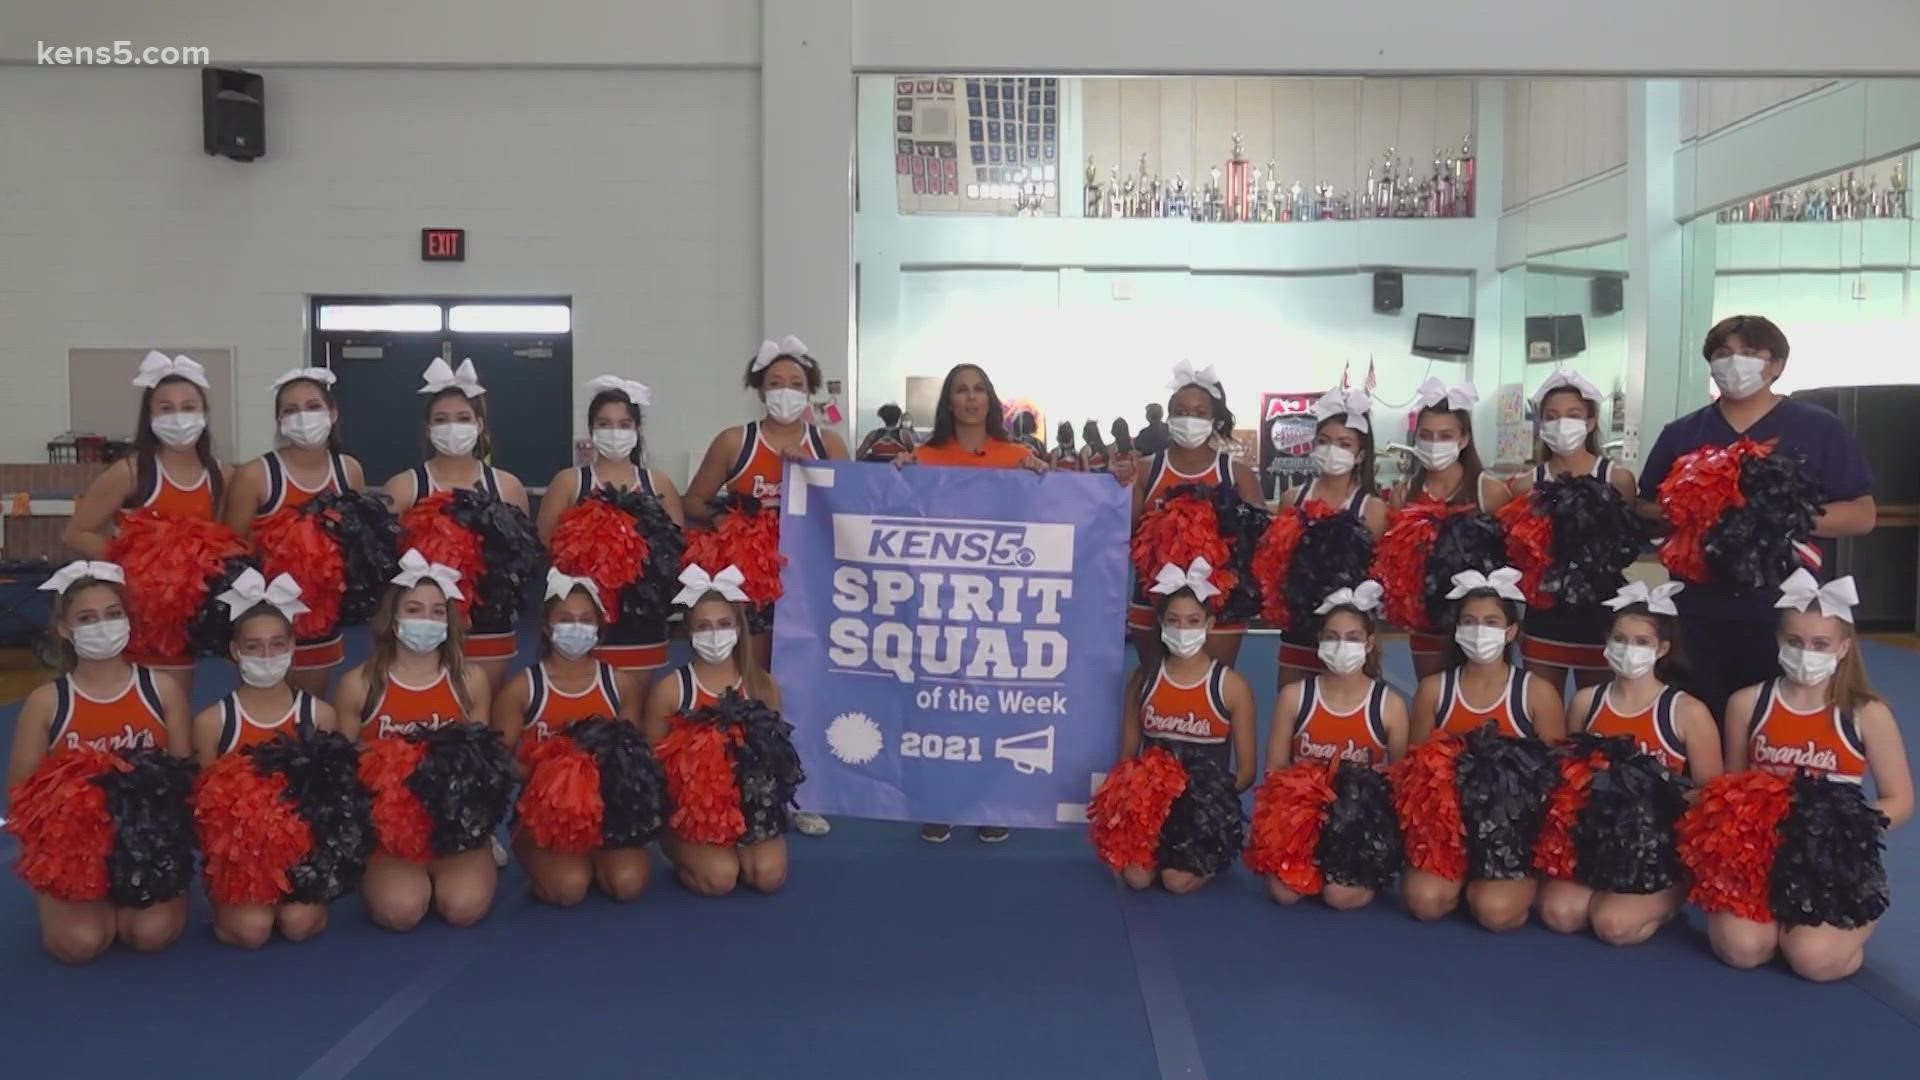 Here's why Brandeis has been named KENS 5's Spirit Squad of the week.